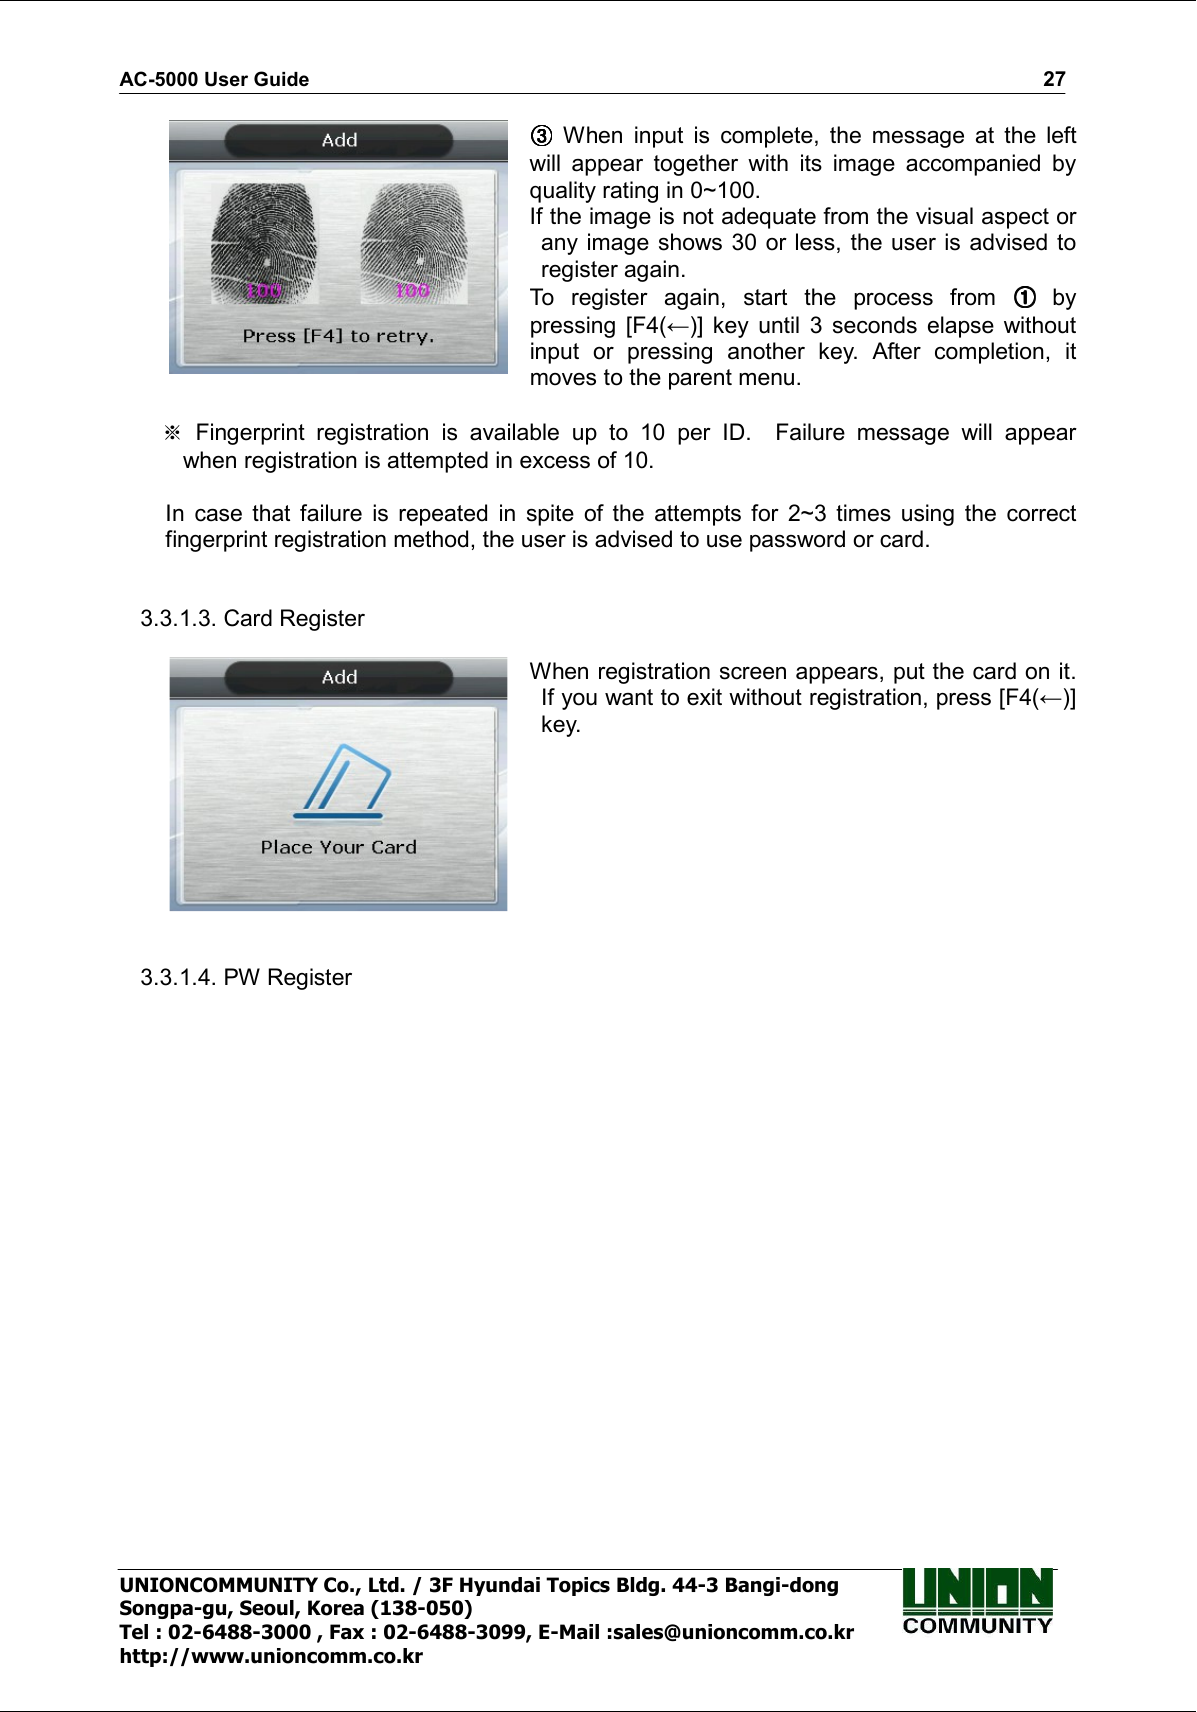 AC-5000 User Guide                                                                                                                                                   27 UNIONCOMMUNITY Co., Ltd. / 3F Hyundai Topics Bldg. 44-3 Bangi-dong Songpa-gu, Seoul, Korea (138-050) Tel : 02-6488-3000 , Fax : 02-6488-3099, E-Mail :sales@unioncomm.co.kr http://www.unioncomm.co.kr   When  input  is  complete,  the  message  at  the  left will  appear  together  with  its  image  accompanied  by quality rating in 0~100. If the image is not adequate from the visual aspect or   any image shows 30 or less, the user is advised to register again.   To  register  again,  start  the  process  from   by pressing  [F4(←)]  key  until  3  seconds  elapse  without input  or  pressing  another  key.  After  completion,  it moves to the parent menu.    Fingerprint  registration  is  available  up  to  10  per  ID.    Failure  message  will  appear when registration is attempted in excess of 10.  In  case  that  failure  is  repeated  in  spite  of  the  attempts  for  2~3  times  using  the  correct fingerprint registration method, the user is advised to use password or card.   3.3.1.3. Card Register   When registration screen appears, put the card on it. If you want to exit without registration, press [F4(←)] key.   3.3.1.4. PW Register  